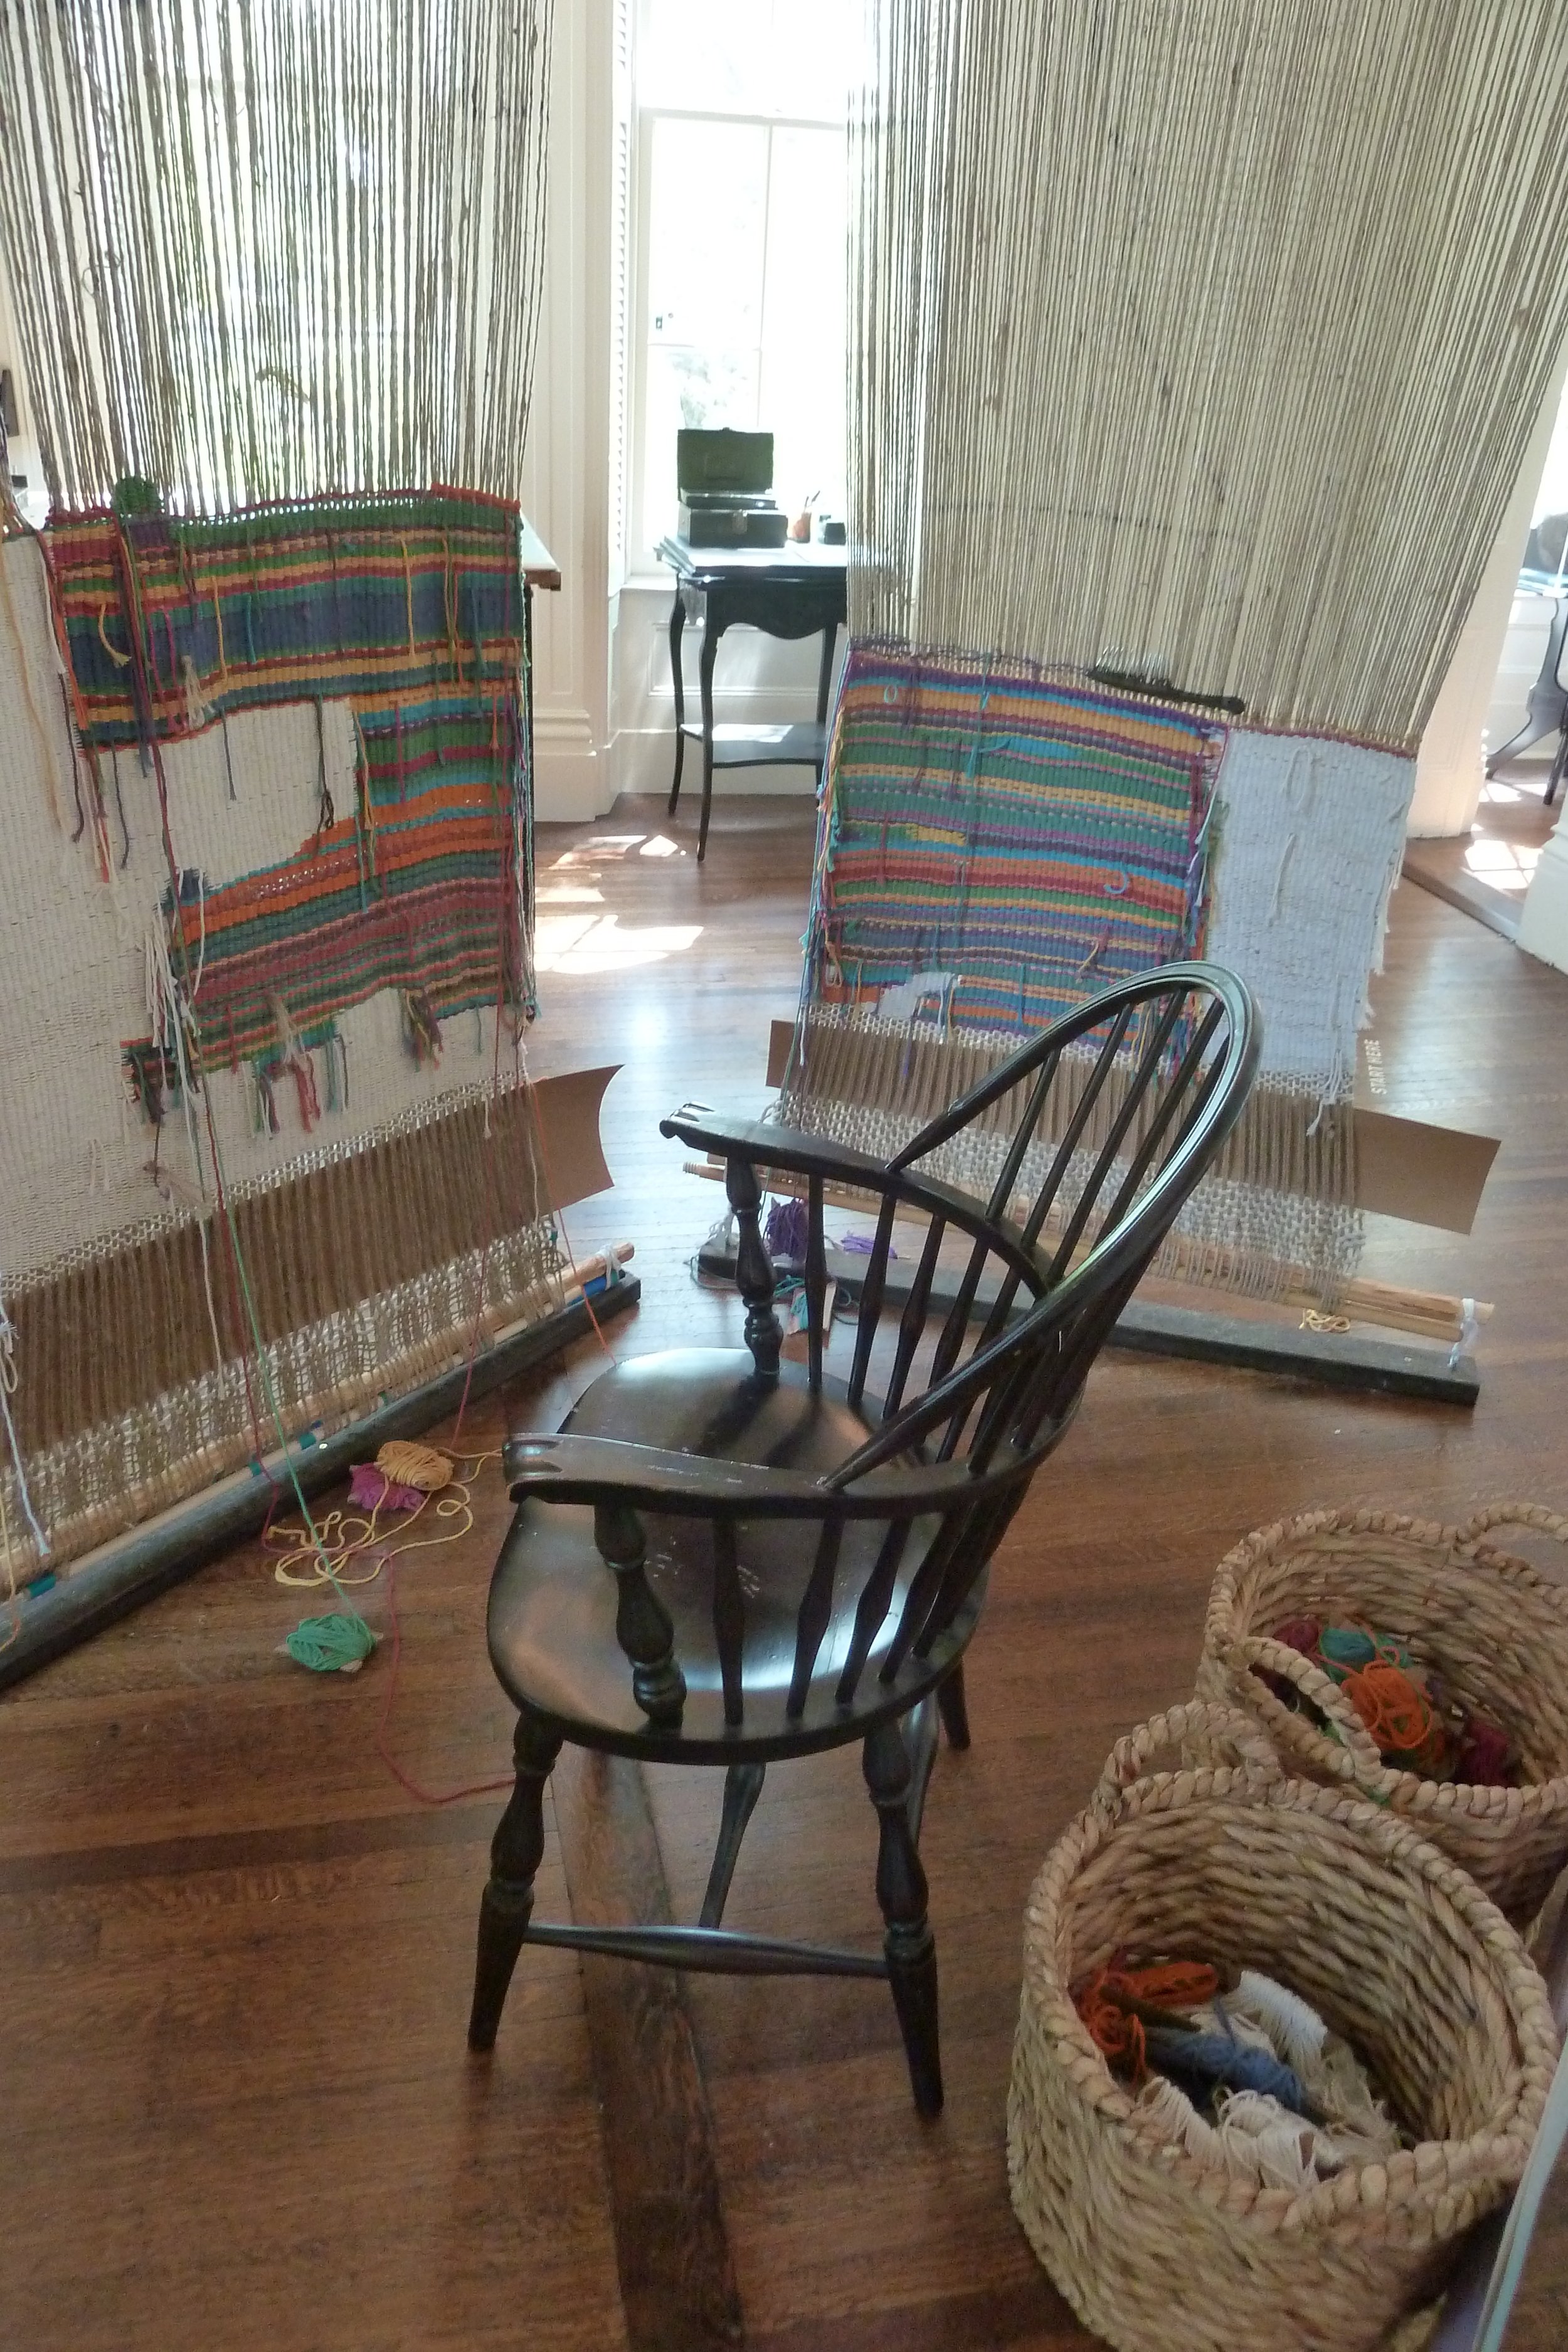 43 - Unfinished Business - Community loom chair.JPG